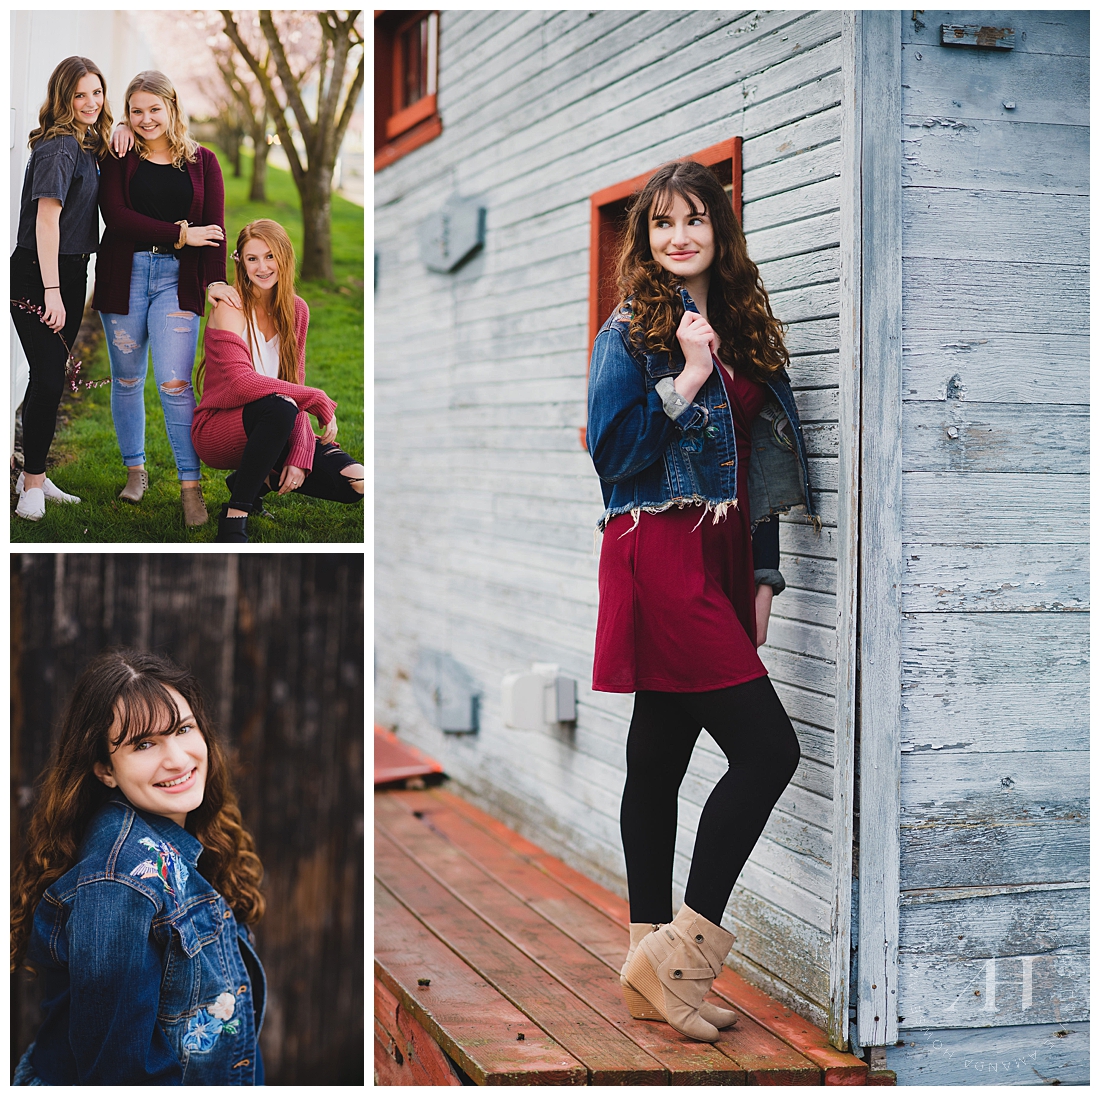 How to Pick Outfits for Senior Portraits | Layer leggings, dresses, jean jackets and more for a versatile look | Guide by Tacoma Senior Photographer Amanda Howse